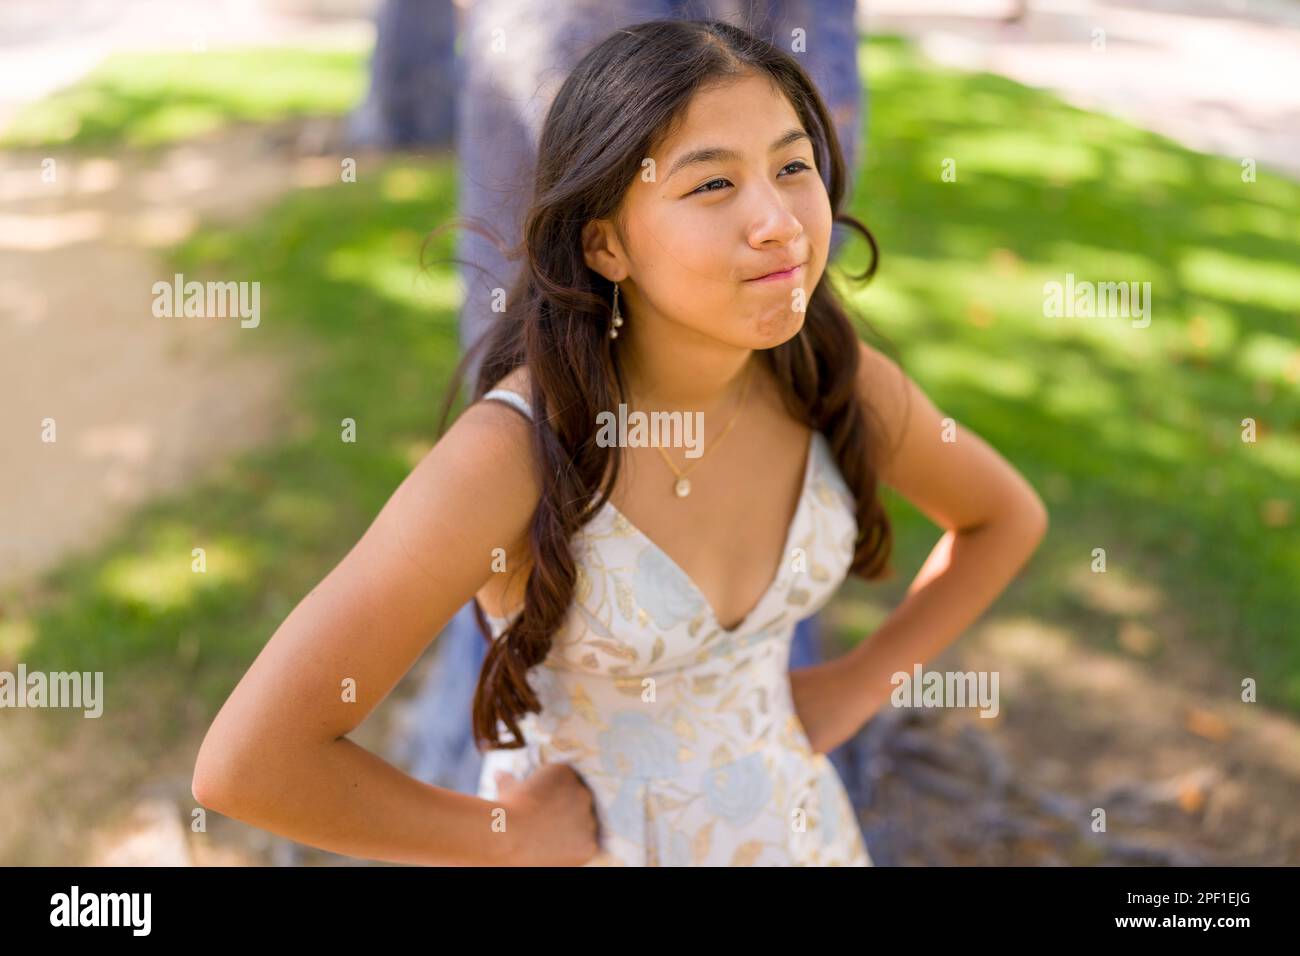 Teenage Asian Girl with Hands on Hips with a Stubborn Look | Prom Dress | Standing Under Painted Blue Tree in a Plaza Stock Photo